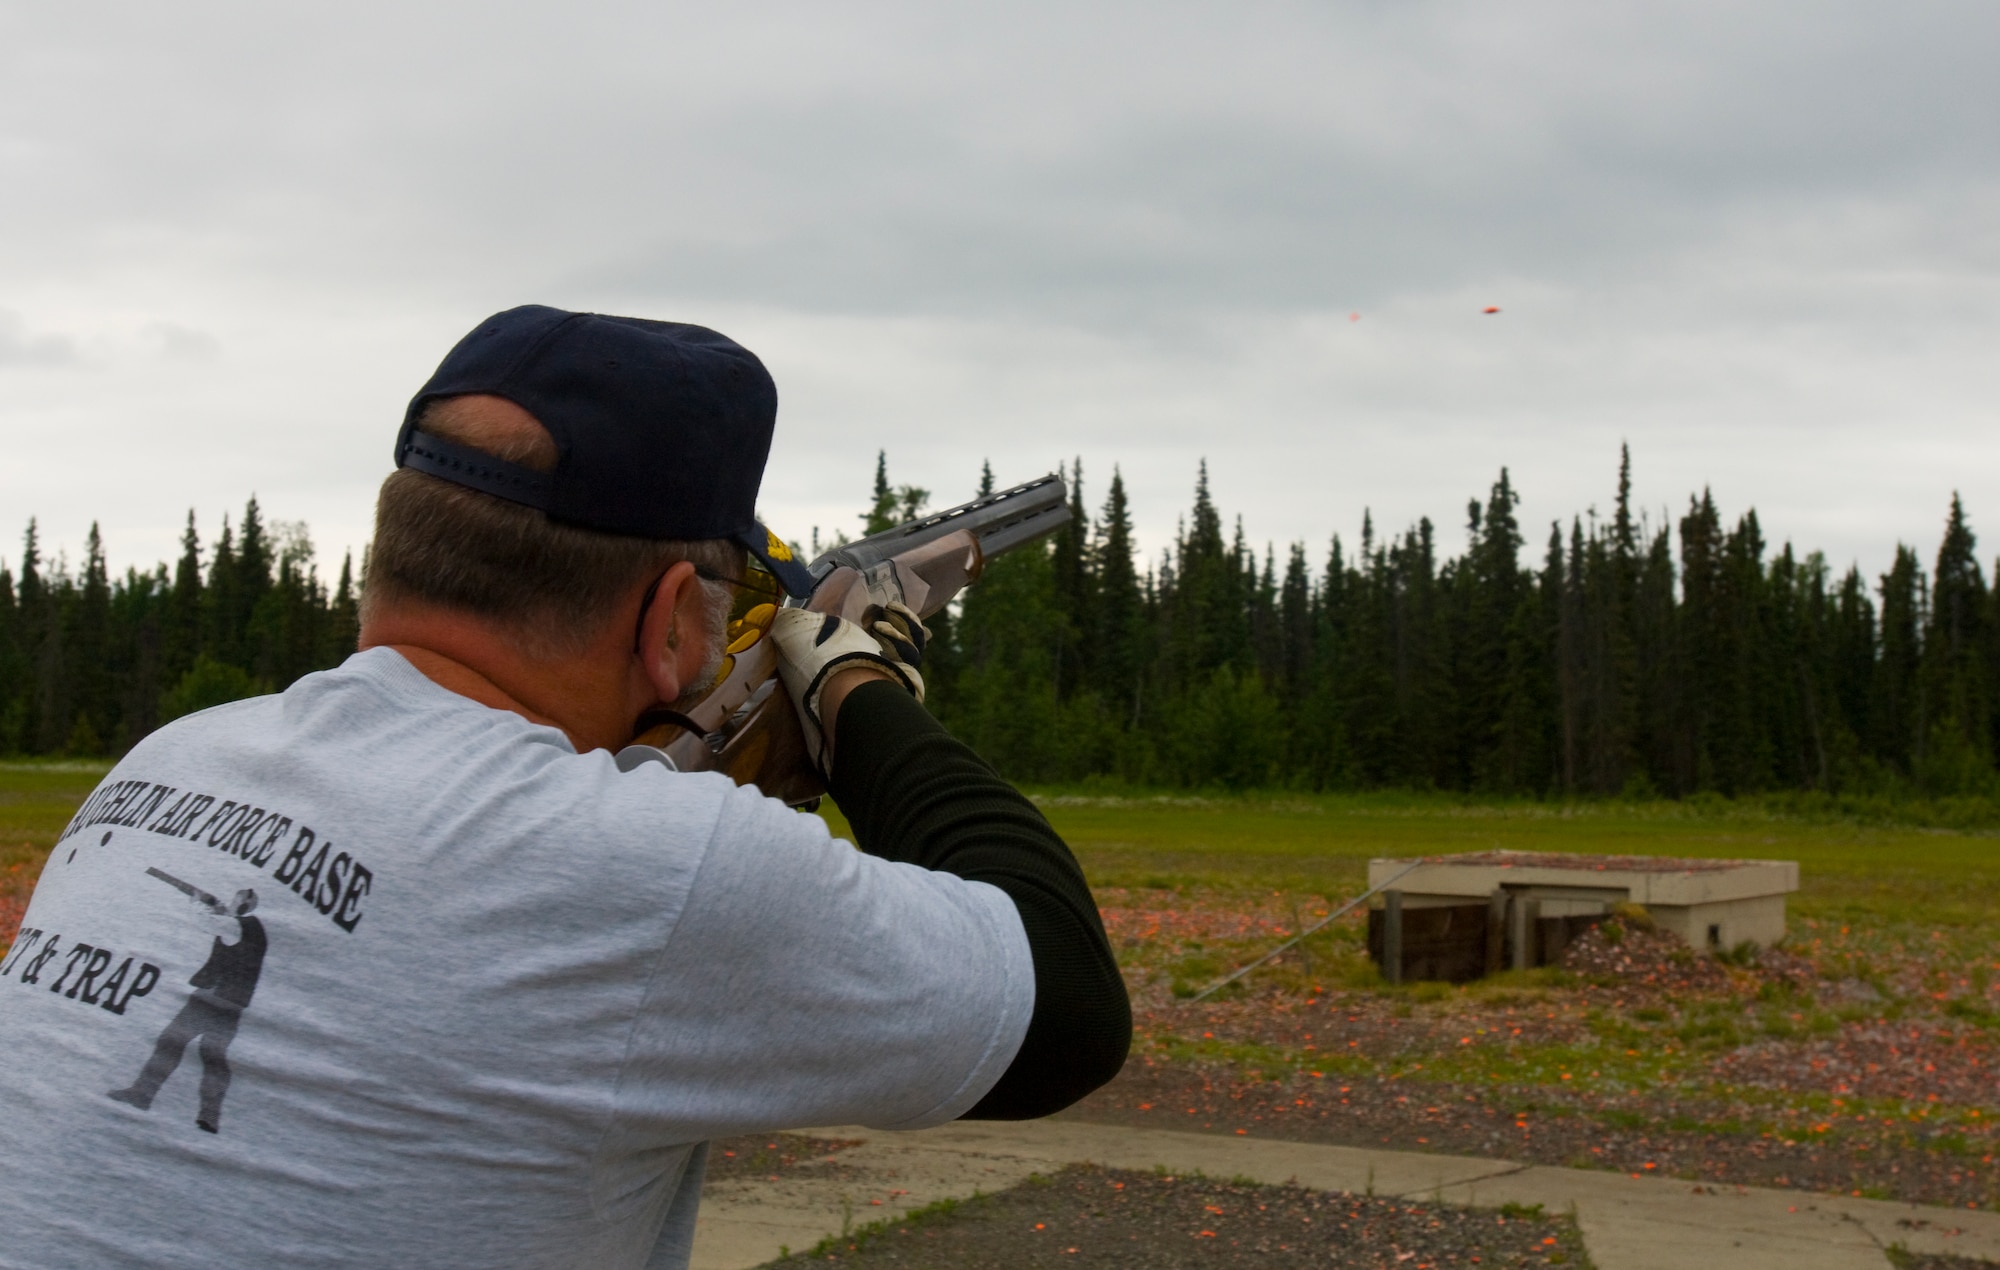 ELMENDORF AIR FORCE BASE, Alaska -- Master Sgt. Kevin Weinand, 354th Medical Operations Squadron, takes aim at one of his 100 pigeons shot during the 410 Bore competition of Alaska Skeet State Championship at Fort Richardson July 13. This was Sergeant Weinand's third state shoot since he began shooting. Sergeant Weinand finished the competition shooting 377 out of 400 pigeons. He was also selected as honorable mention to the All-American Team and Zone 7 Military Team. (U.S. Air Force photo/Airman 1st Class David Carbajal)